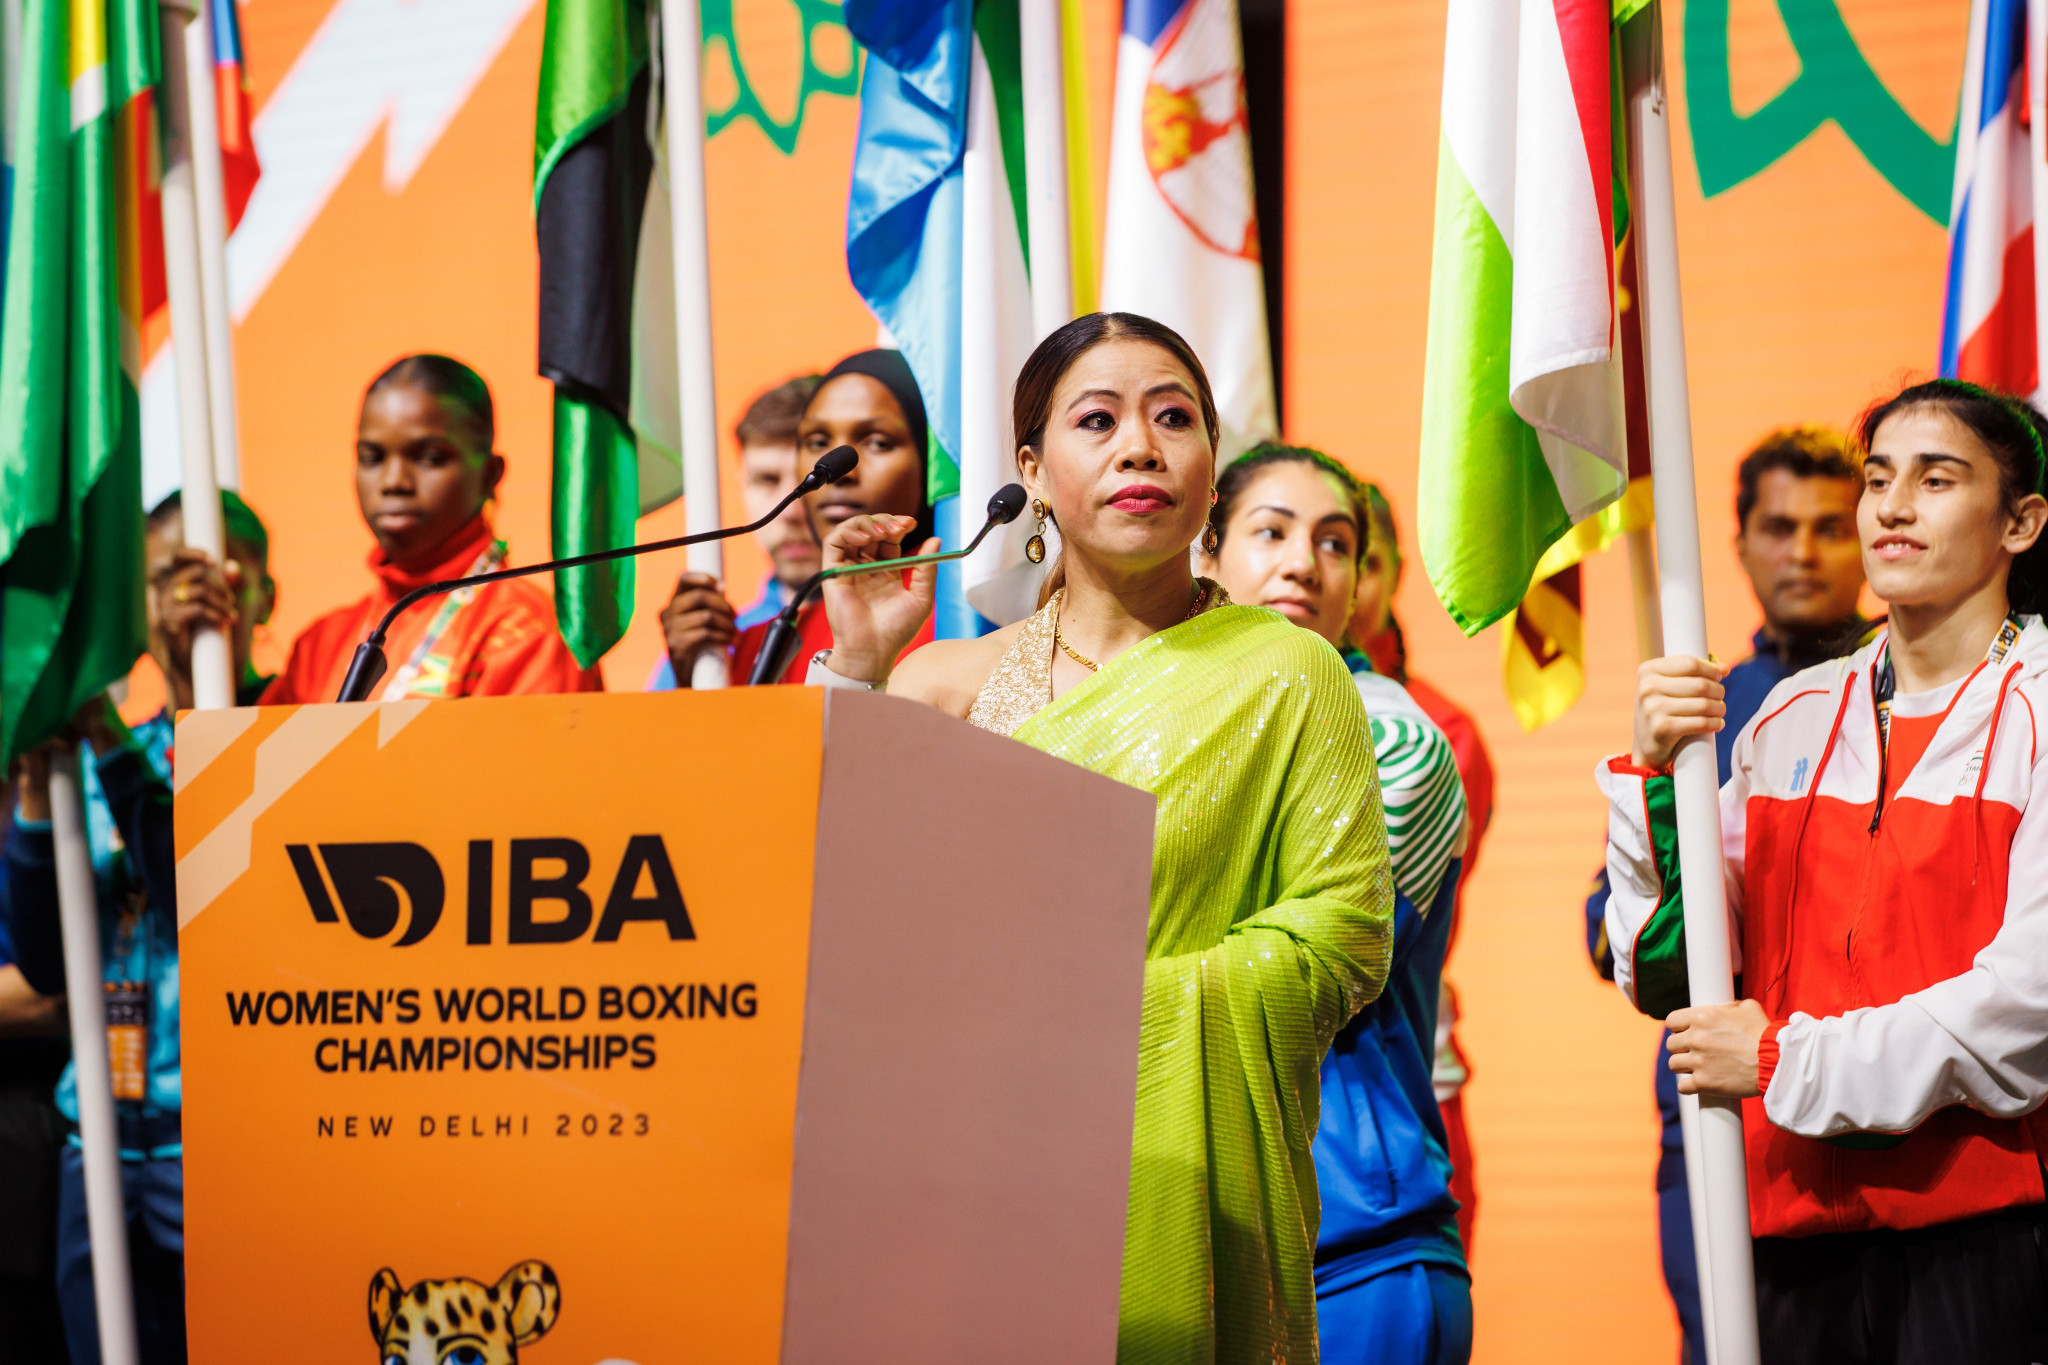 India's six-time world champion Mary Kom, who is a brand ambassador for New Delhi 2023, spoke on behalf of athletes at the ceremony ©IBA